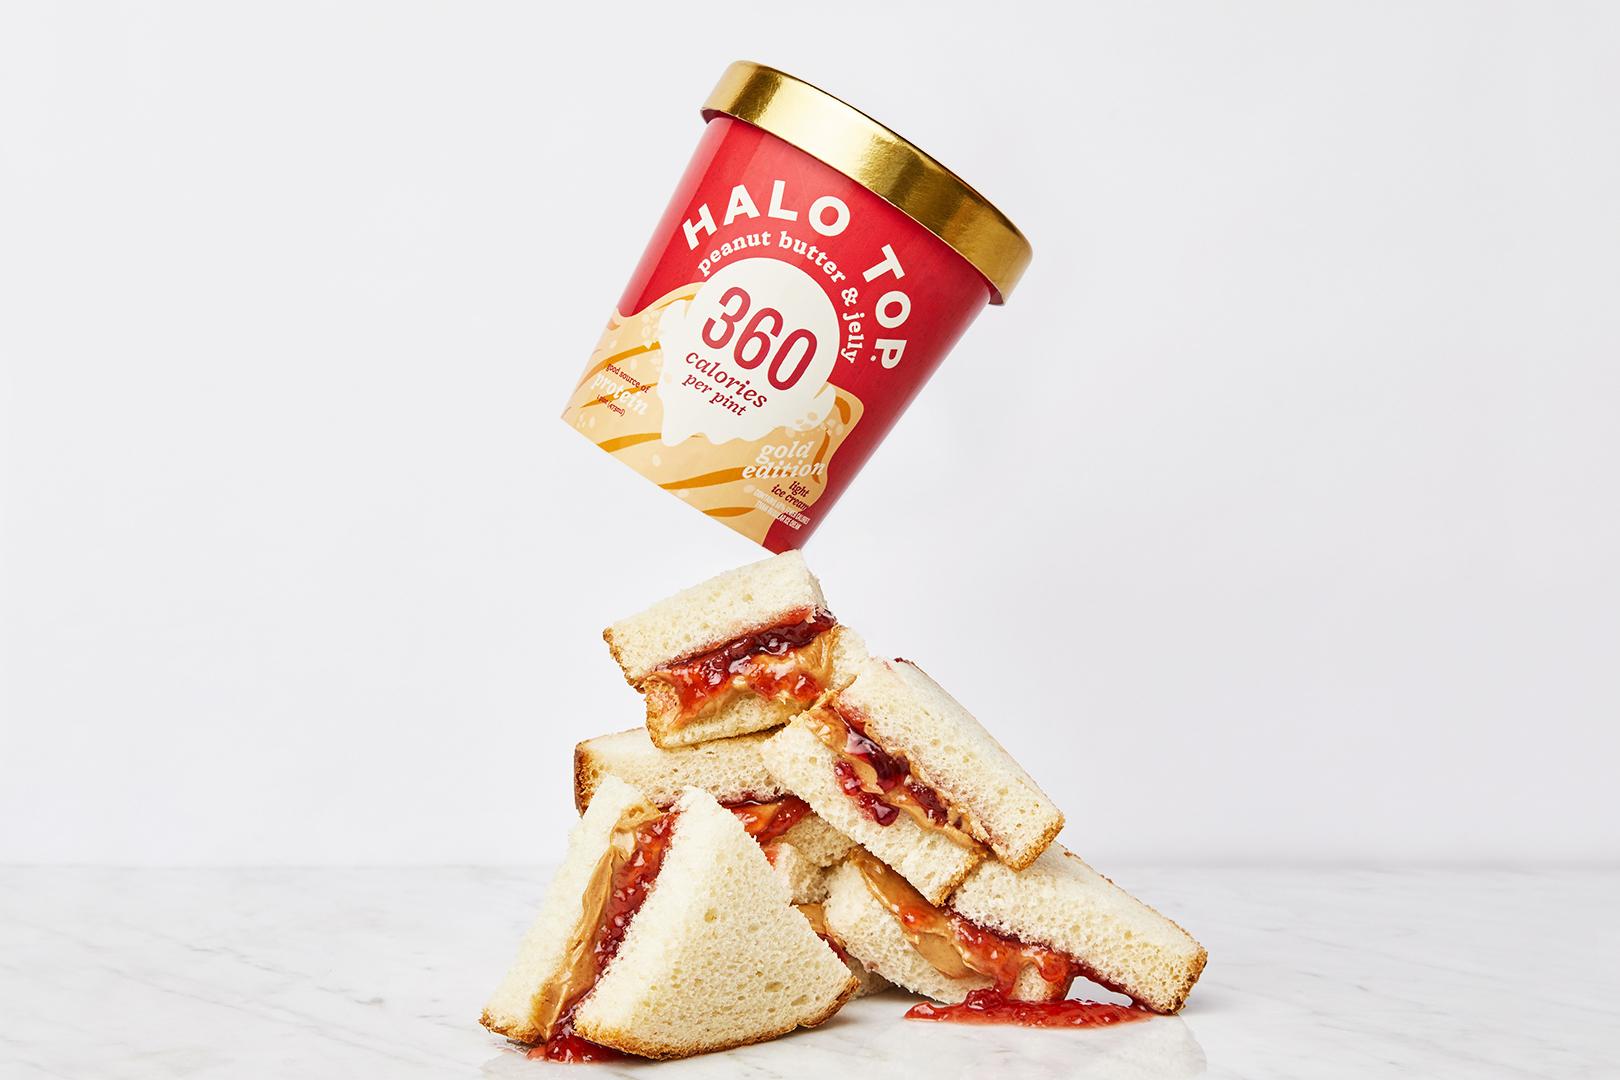 Halo Top Peanut Butter and Jelly